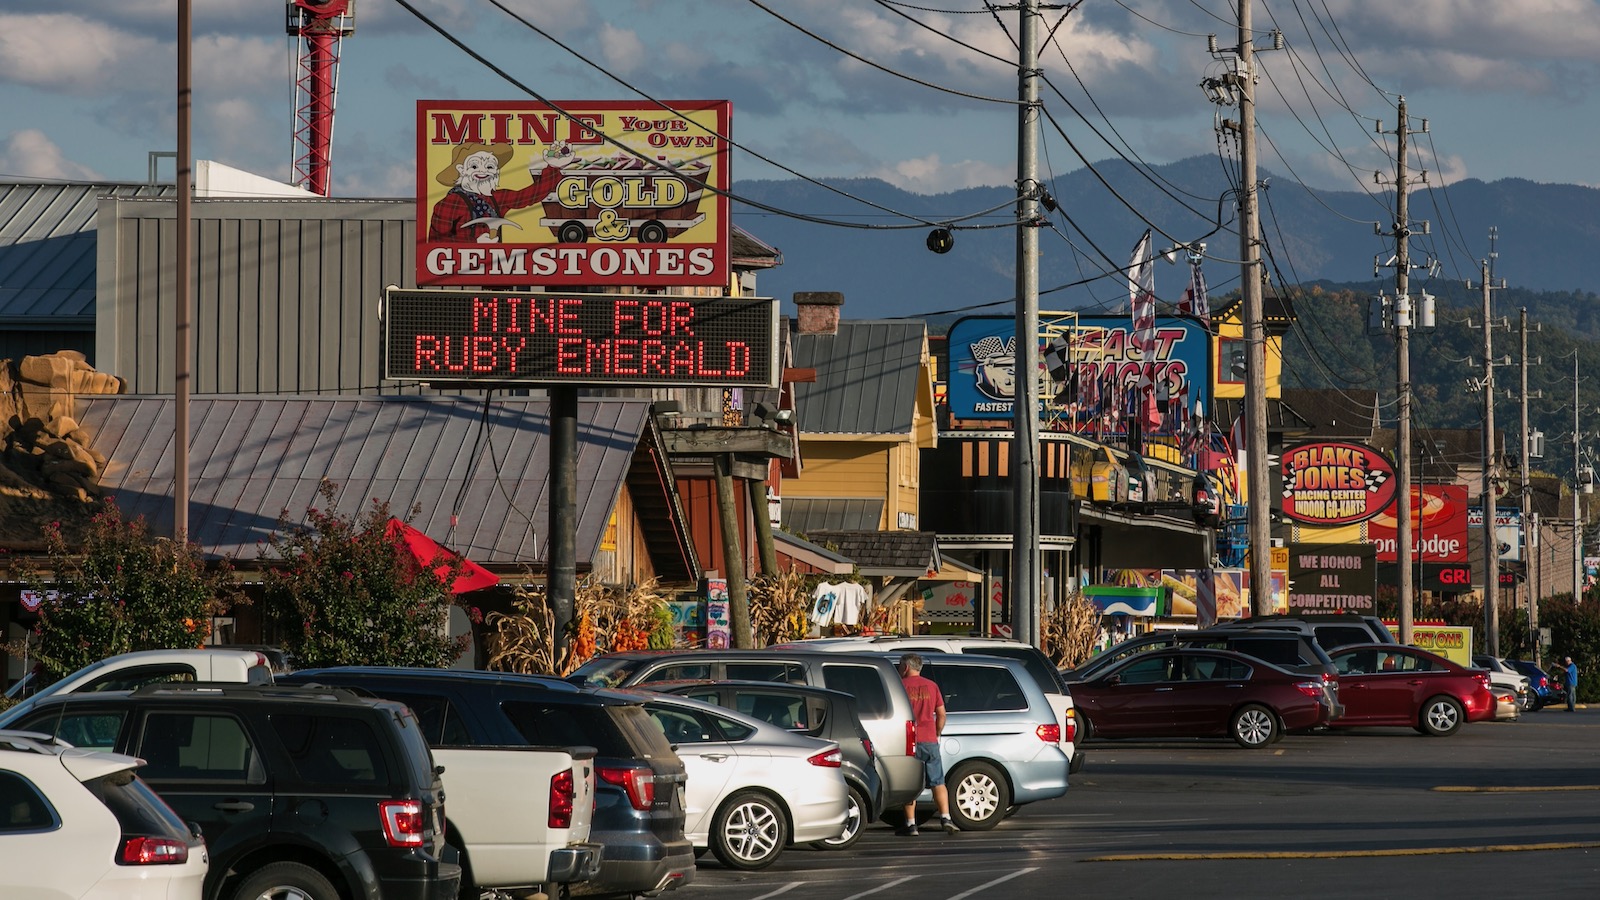 The main street in Pigeon Forge, Tennessee is packed with cars and lined with tourist attractions.